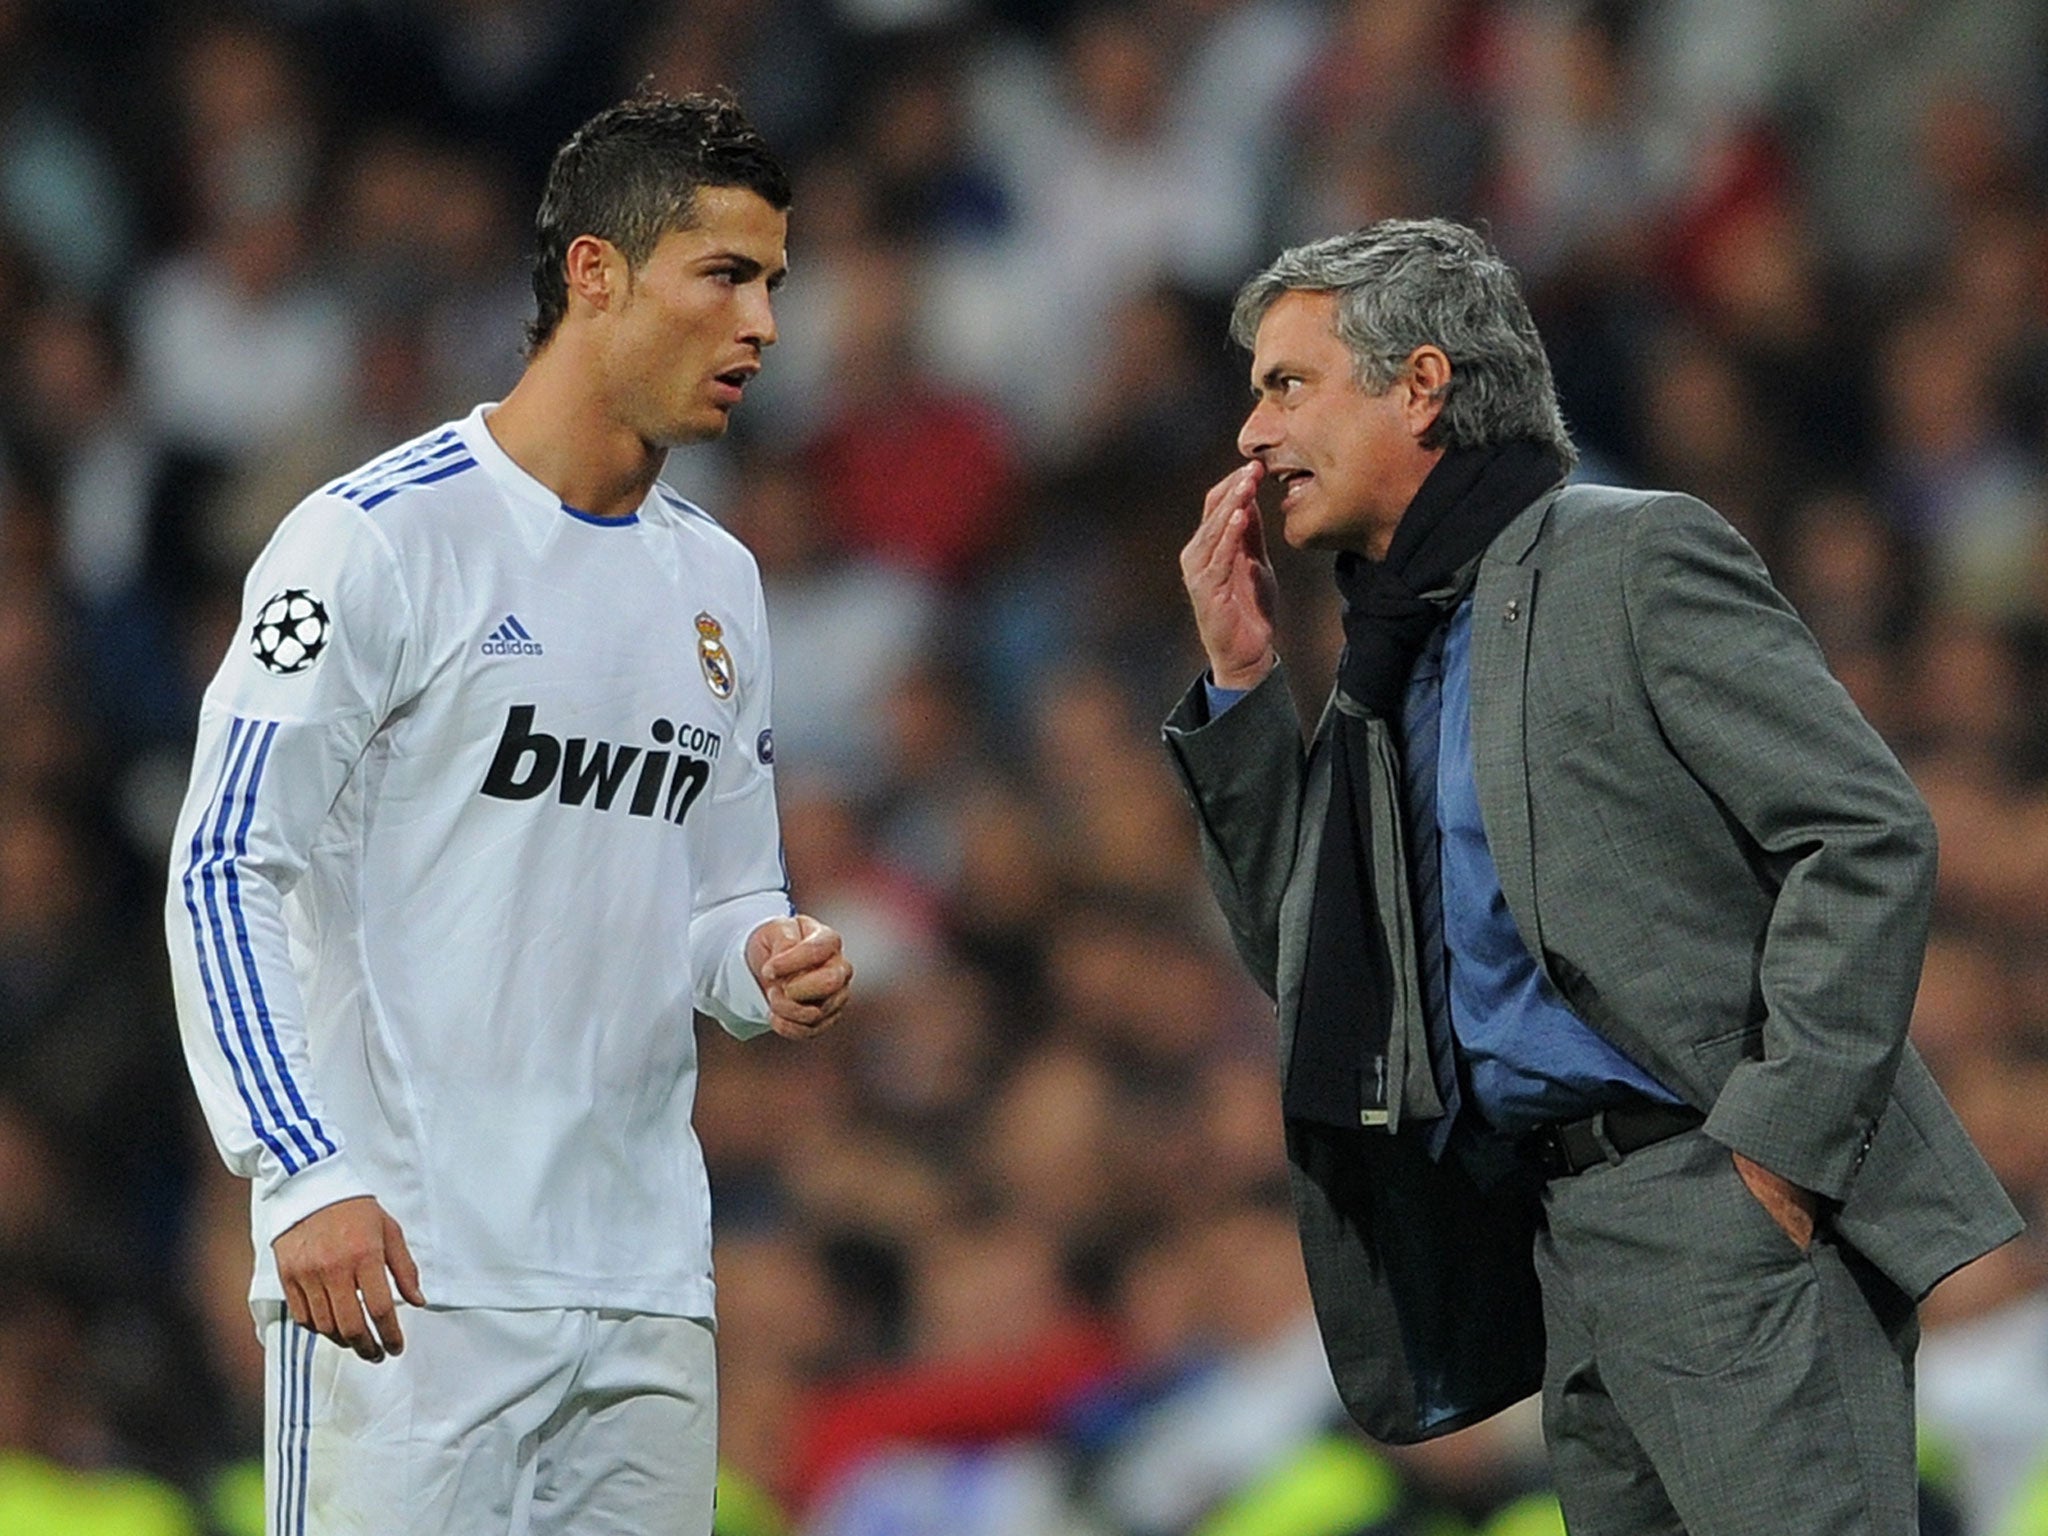 Jose Mourinho together with Cristiano Ronaldo when together at Real Madrid